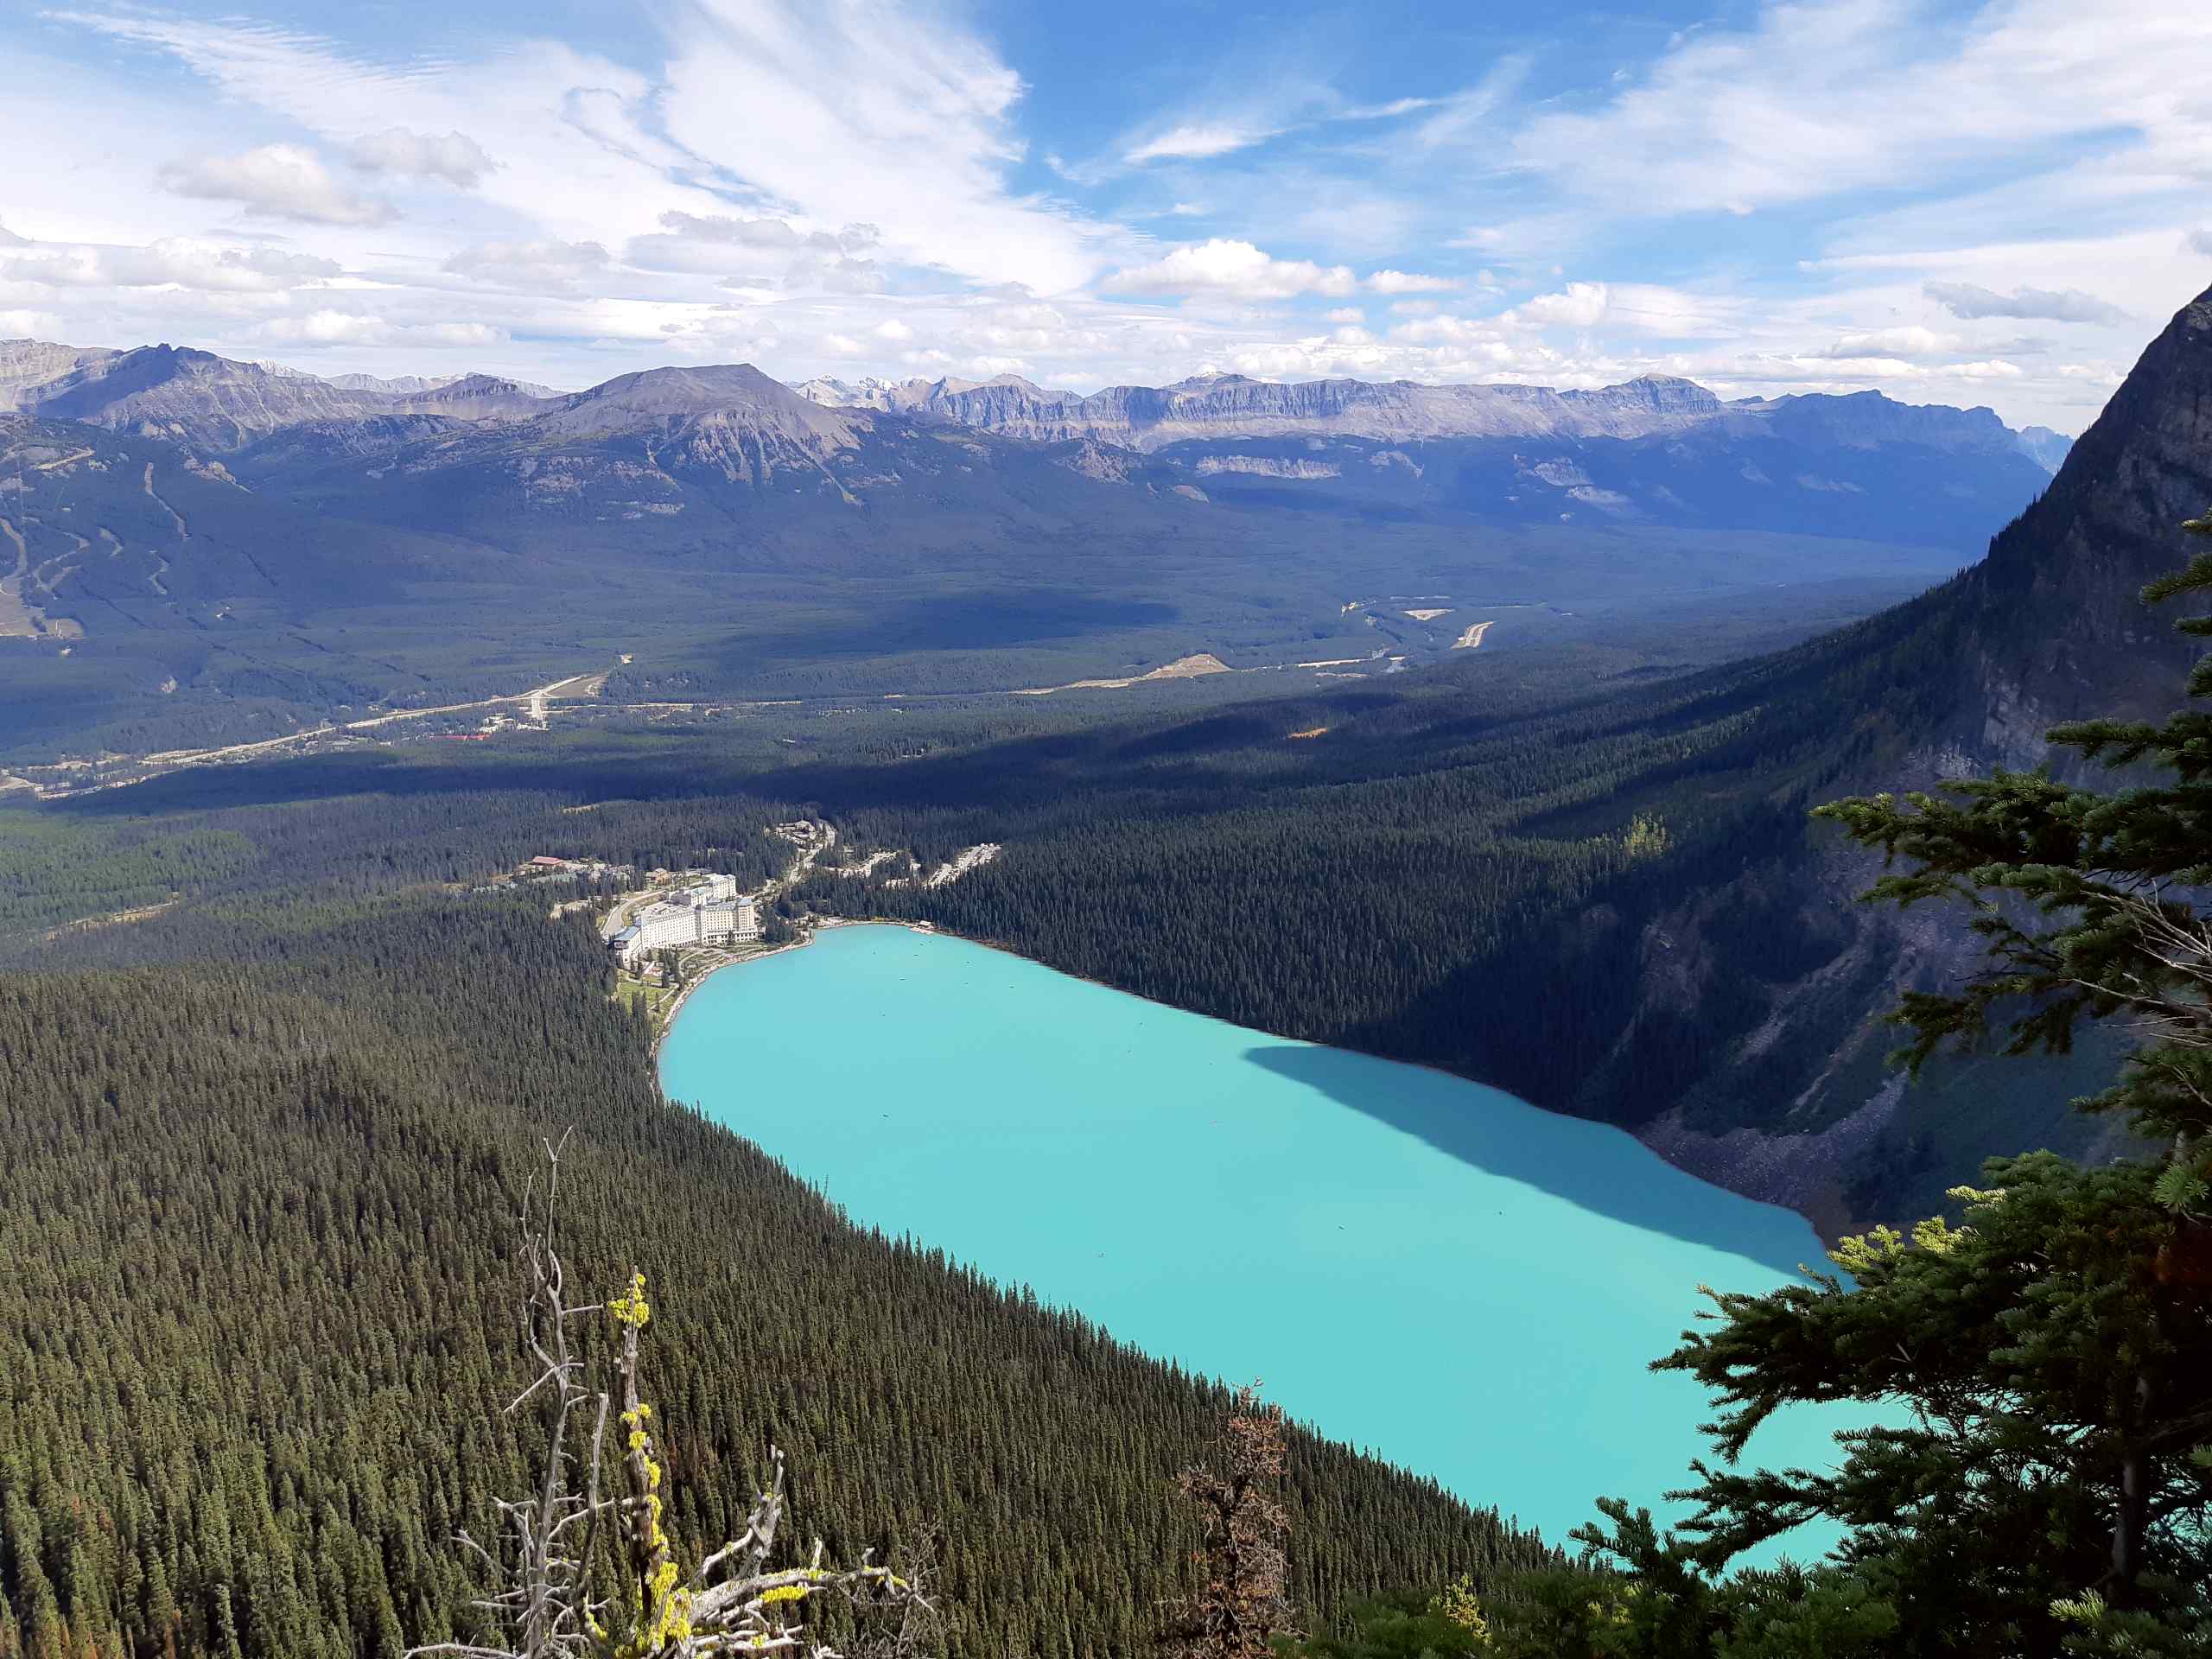 Big Beehive trail offers fantastic views around Lake Louise and it's especially stunning in fall